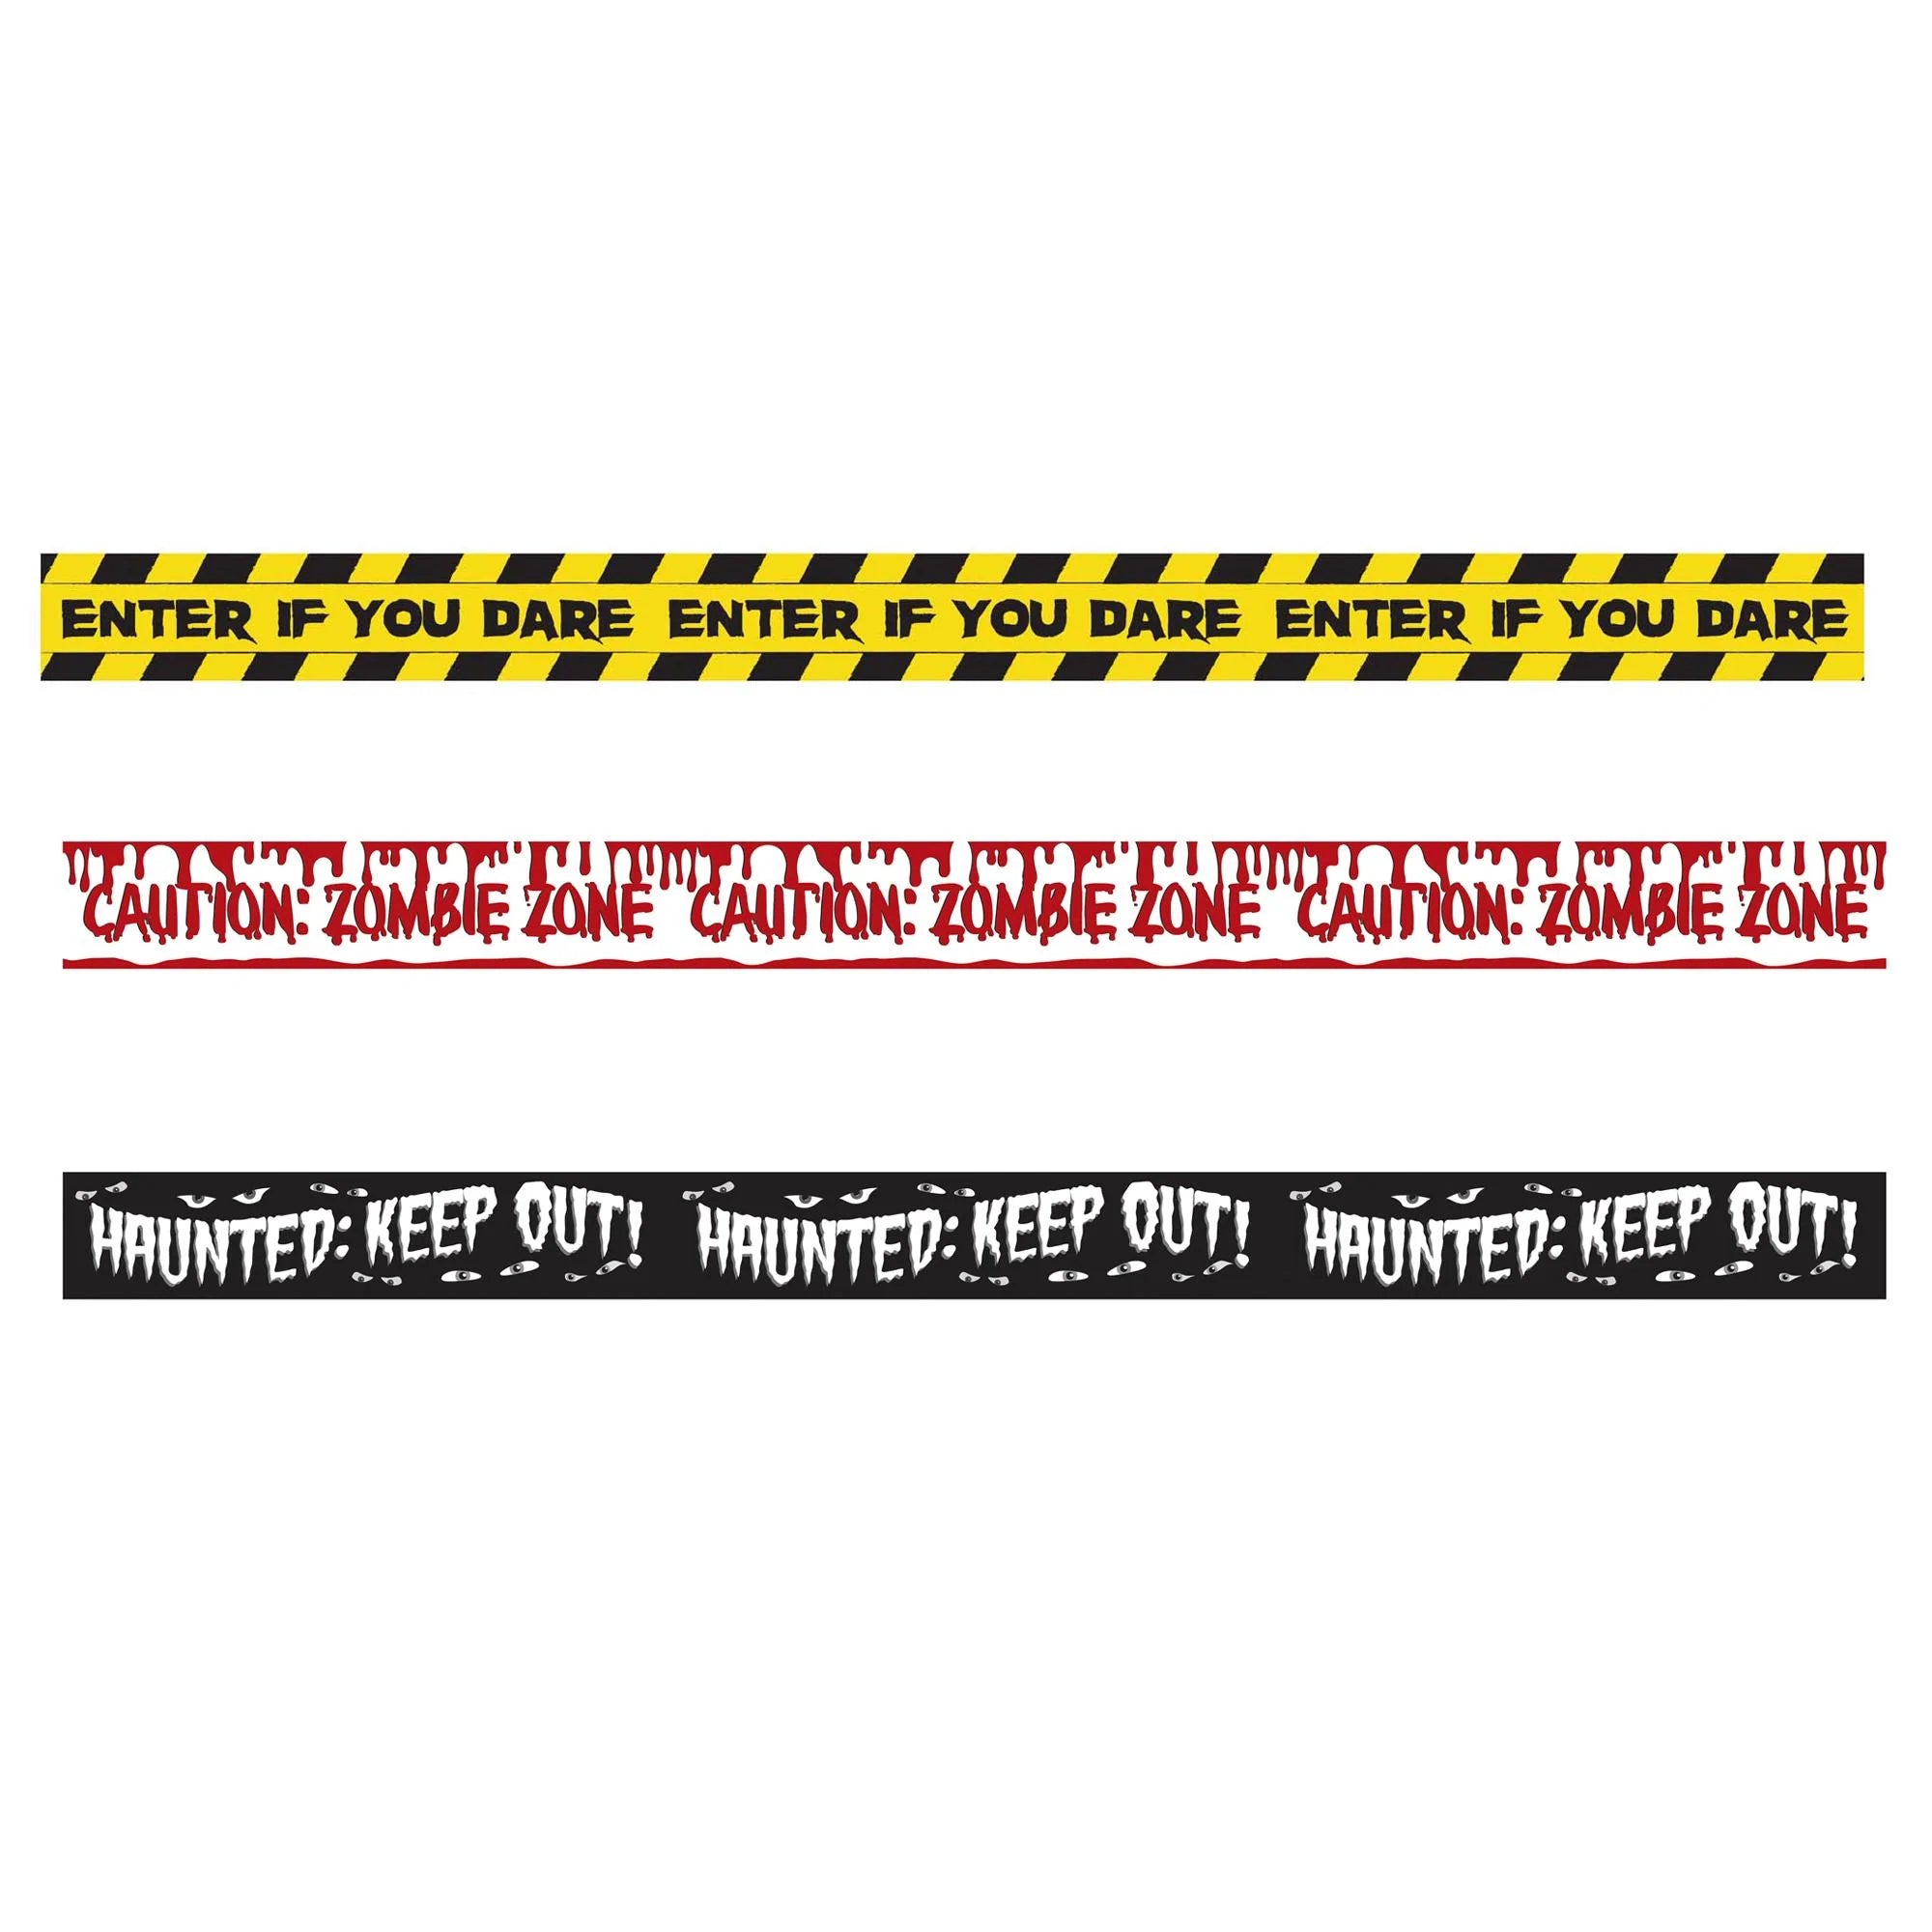 Halloween Fright Plastic Tape Banners 30ft